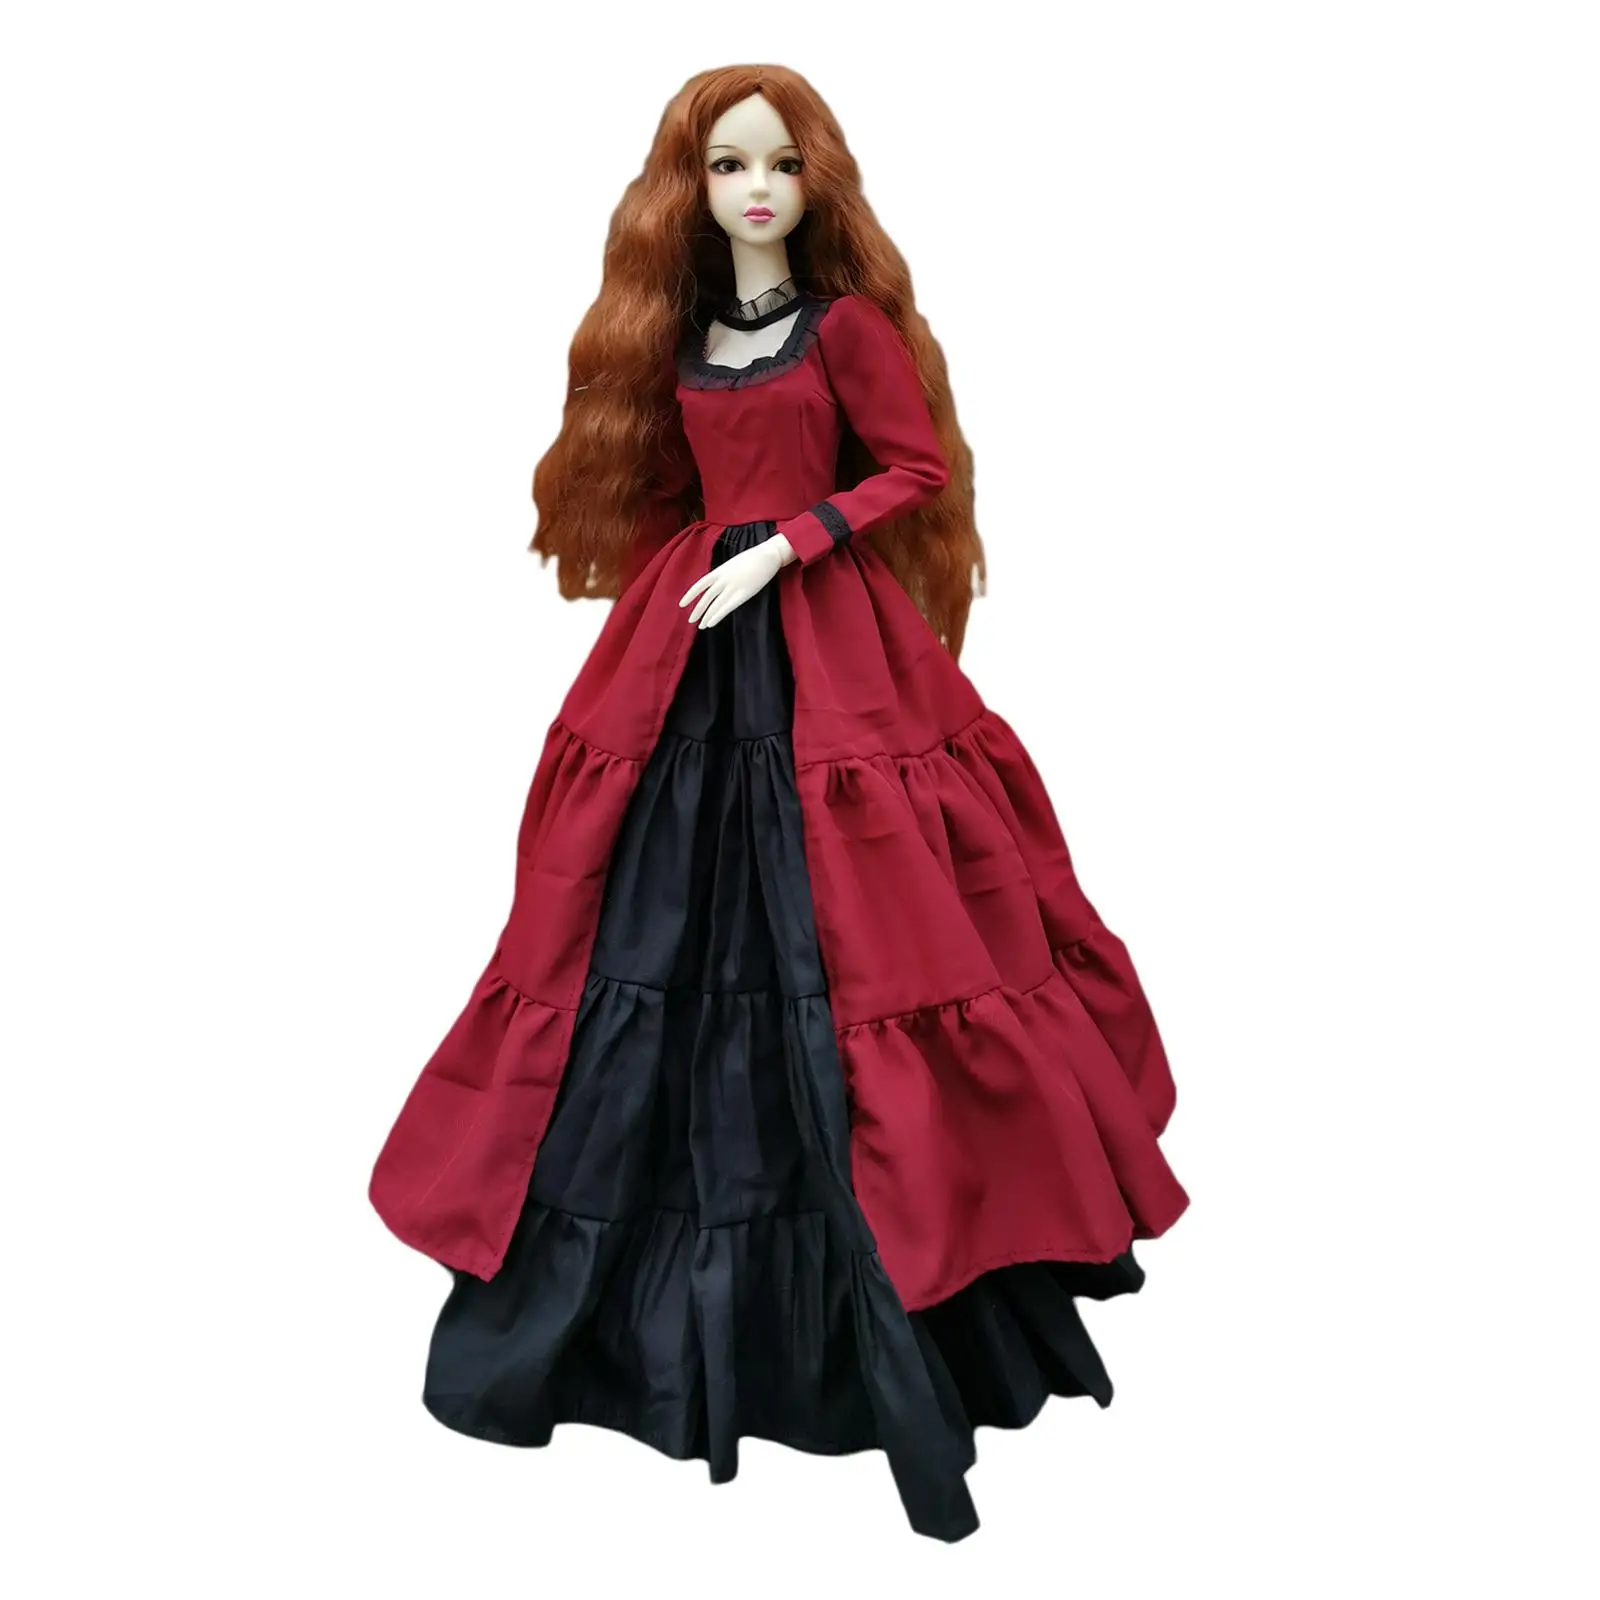 Ball Jointed Doll 1/3 Dolls Easy to Pose with Beautiful Doll Clothes and Doll Action Figures for Women